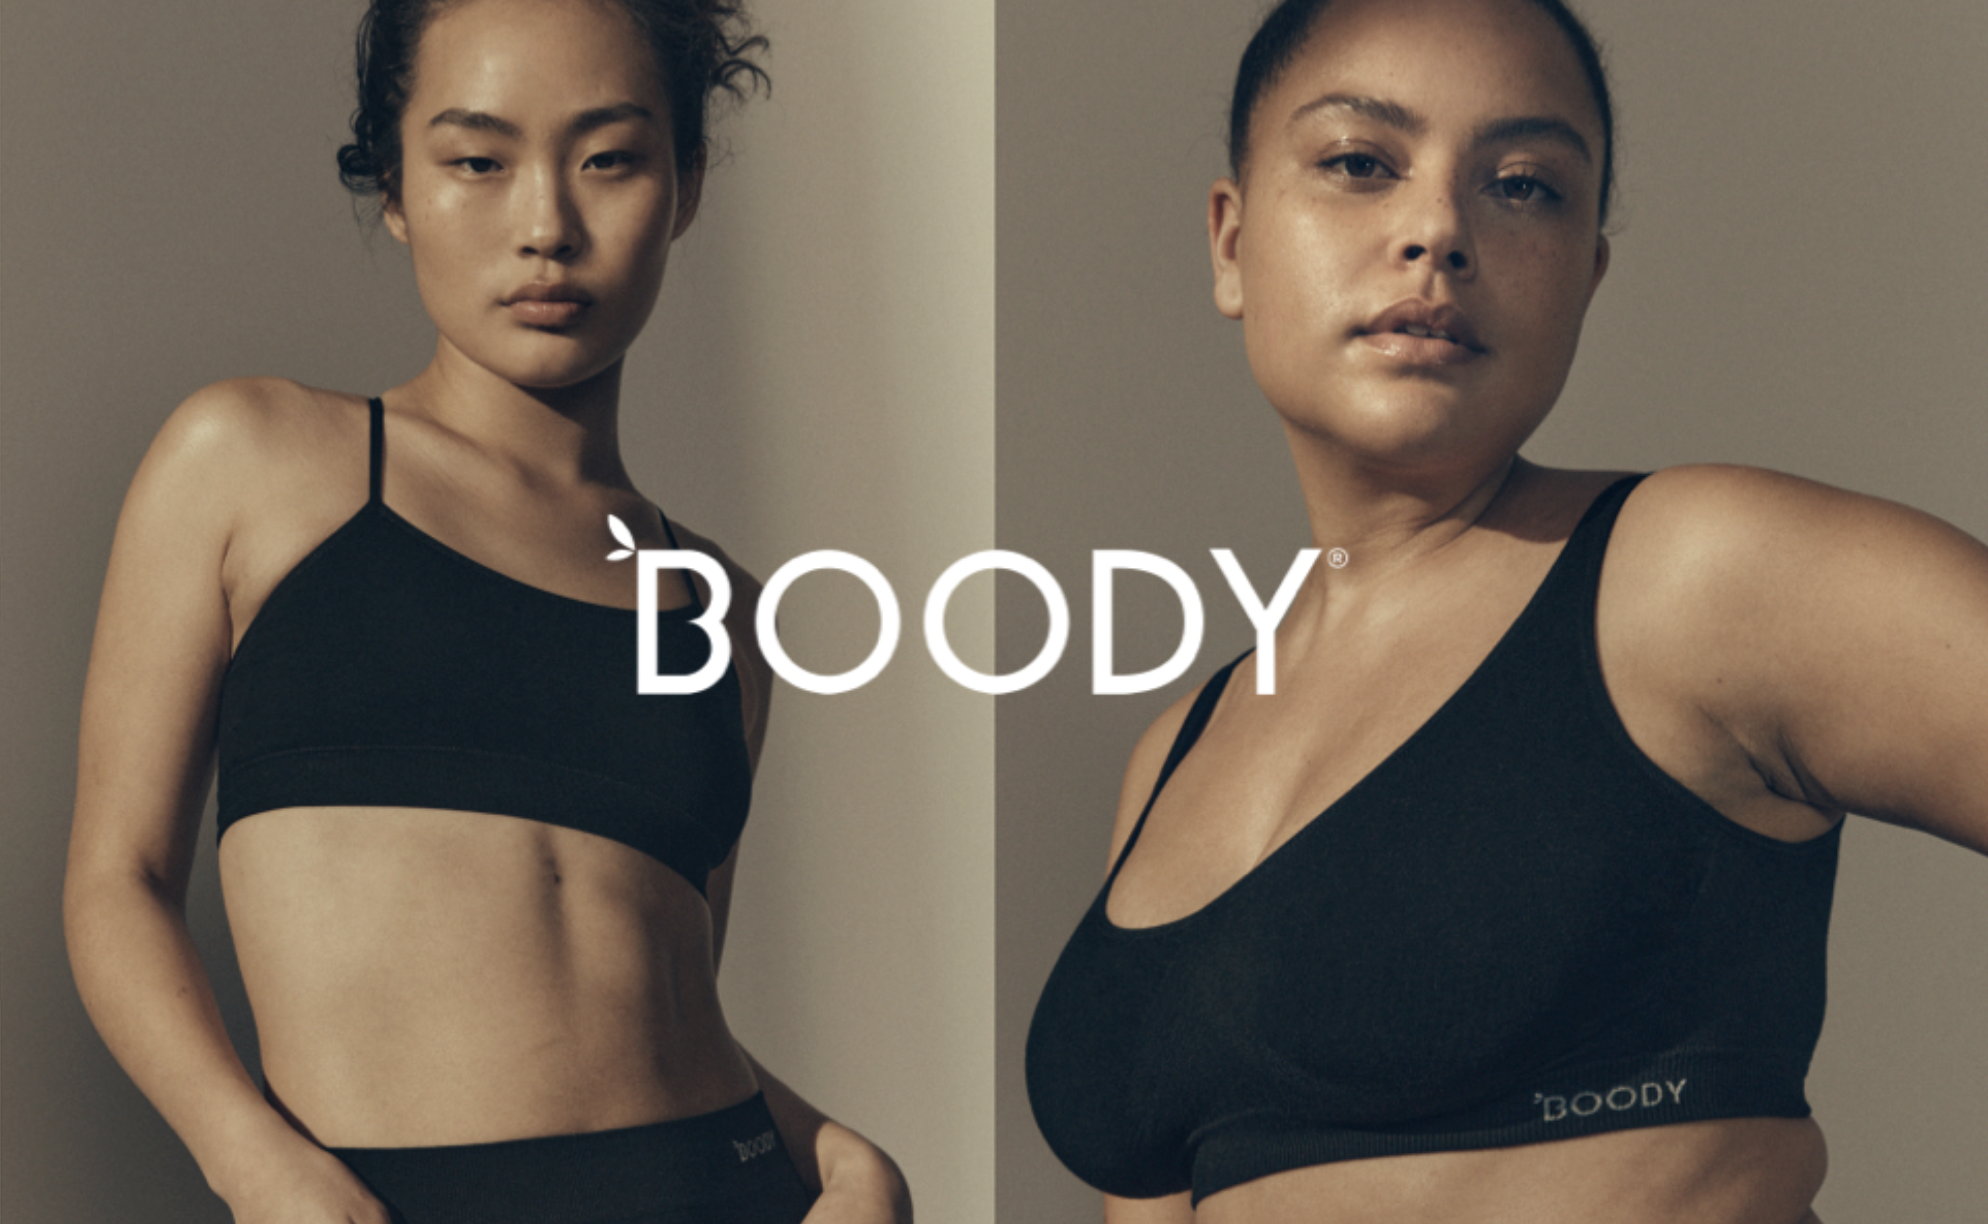 Boody hands corporate PR to Sling & Stone